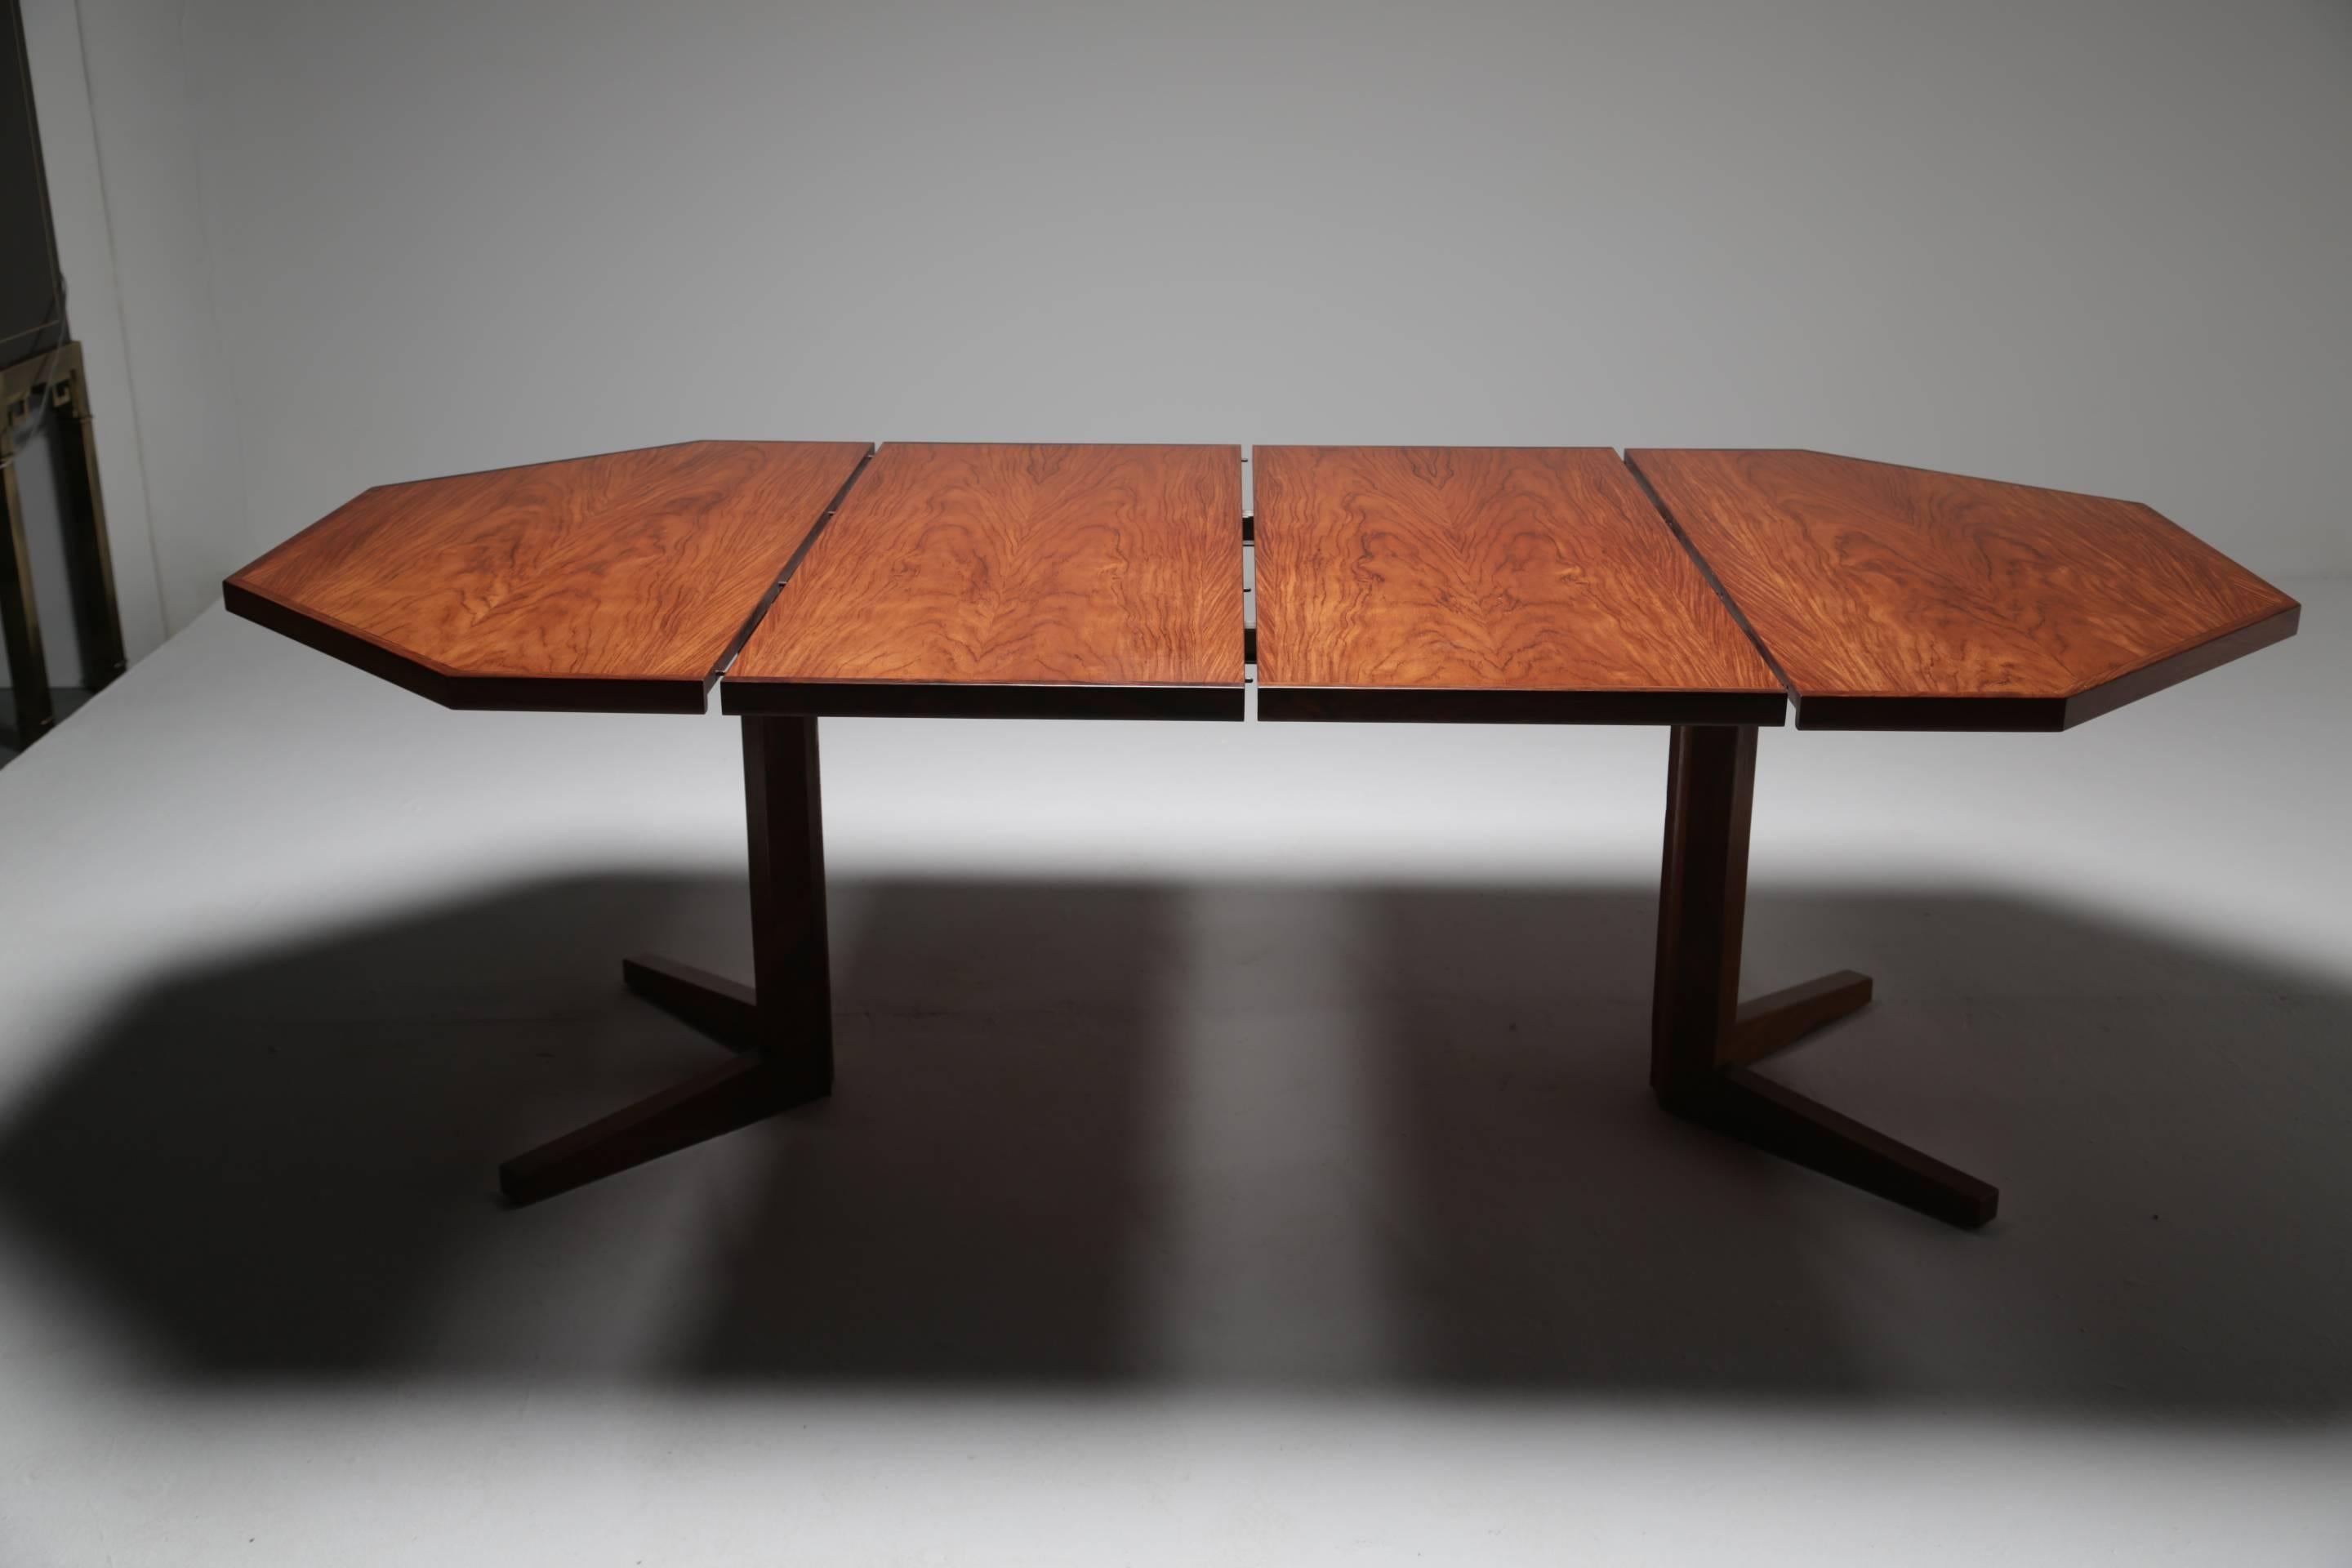 An unusual vintage rosewood dining table made by the Danish factory Dyrlund. This midcentury dining table is octagonal in shape and comes with two extending leaves which cleverly bring the table from a four-seat breakfast table to a six or